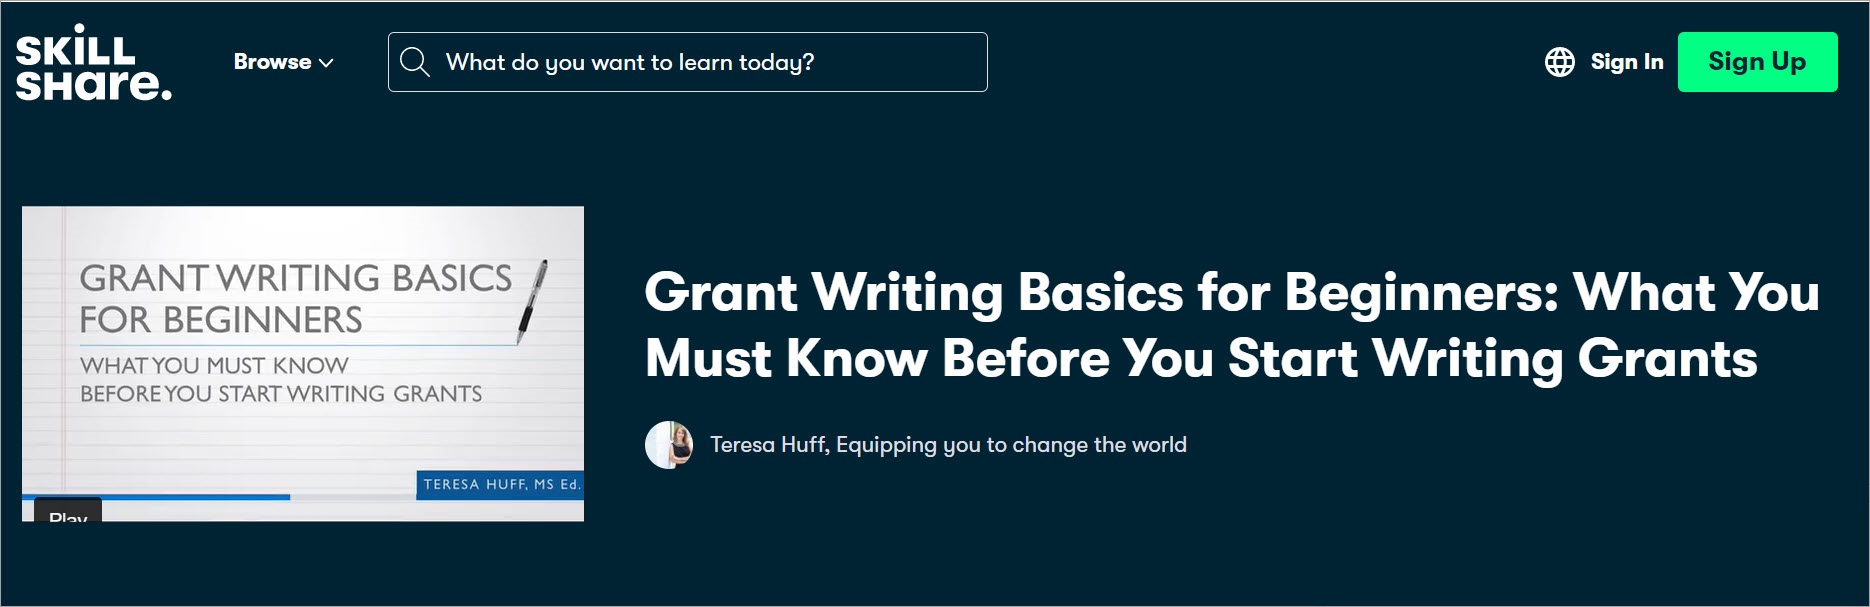 Skill Share Grant Writing Course